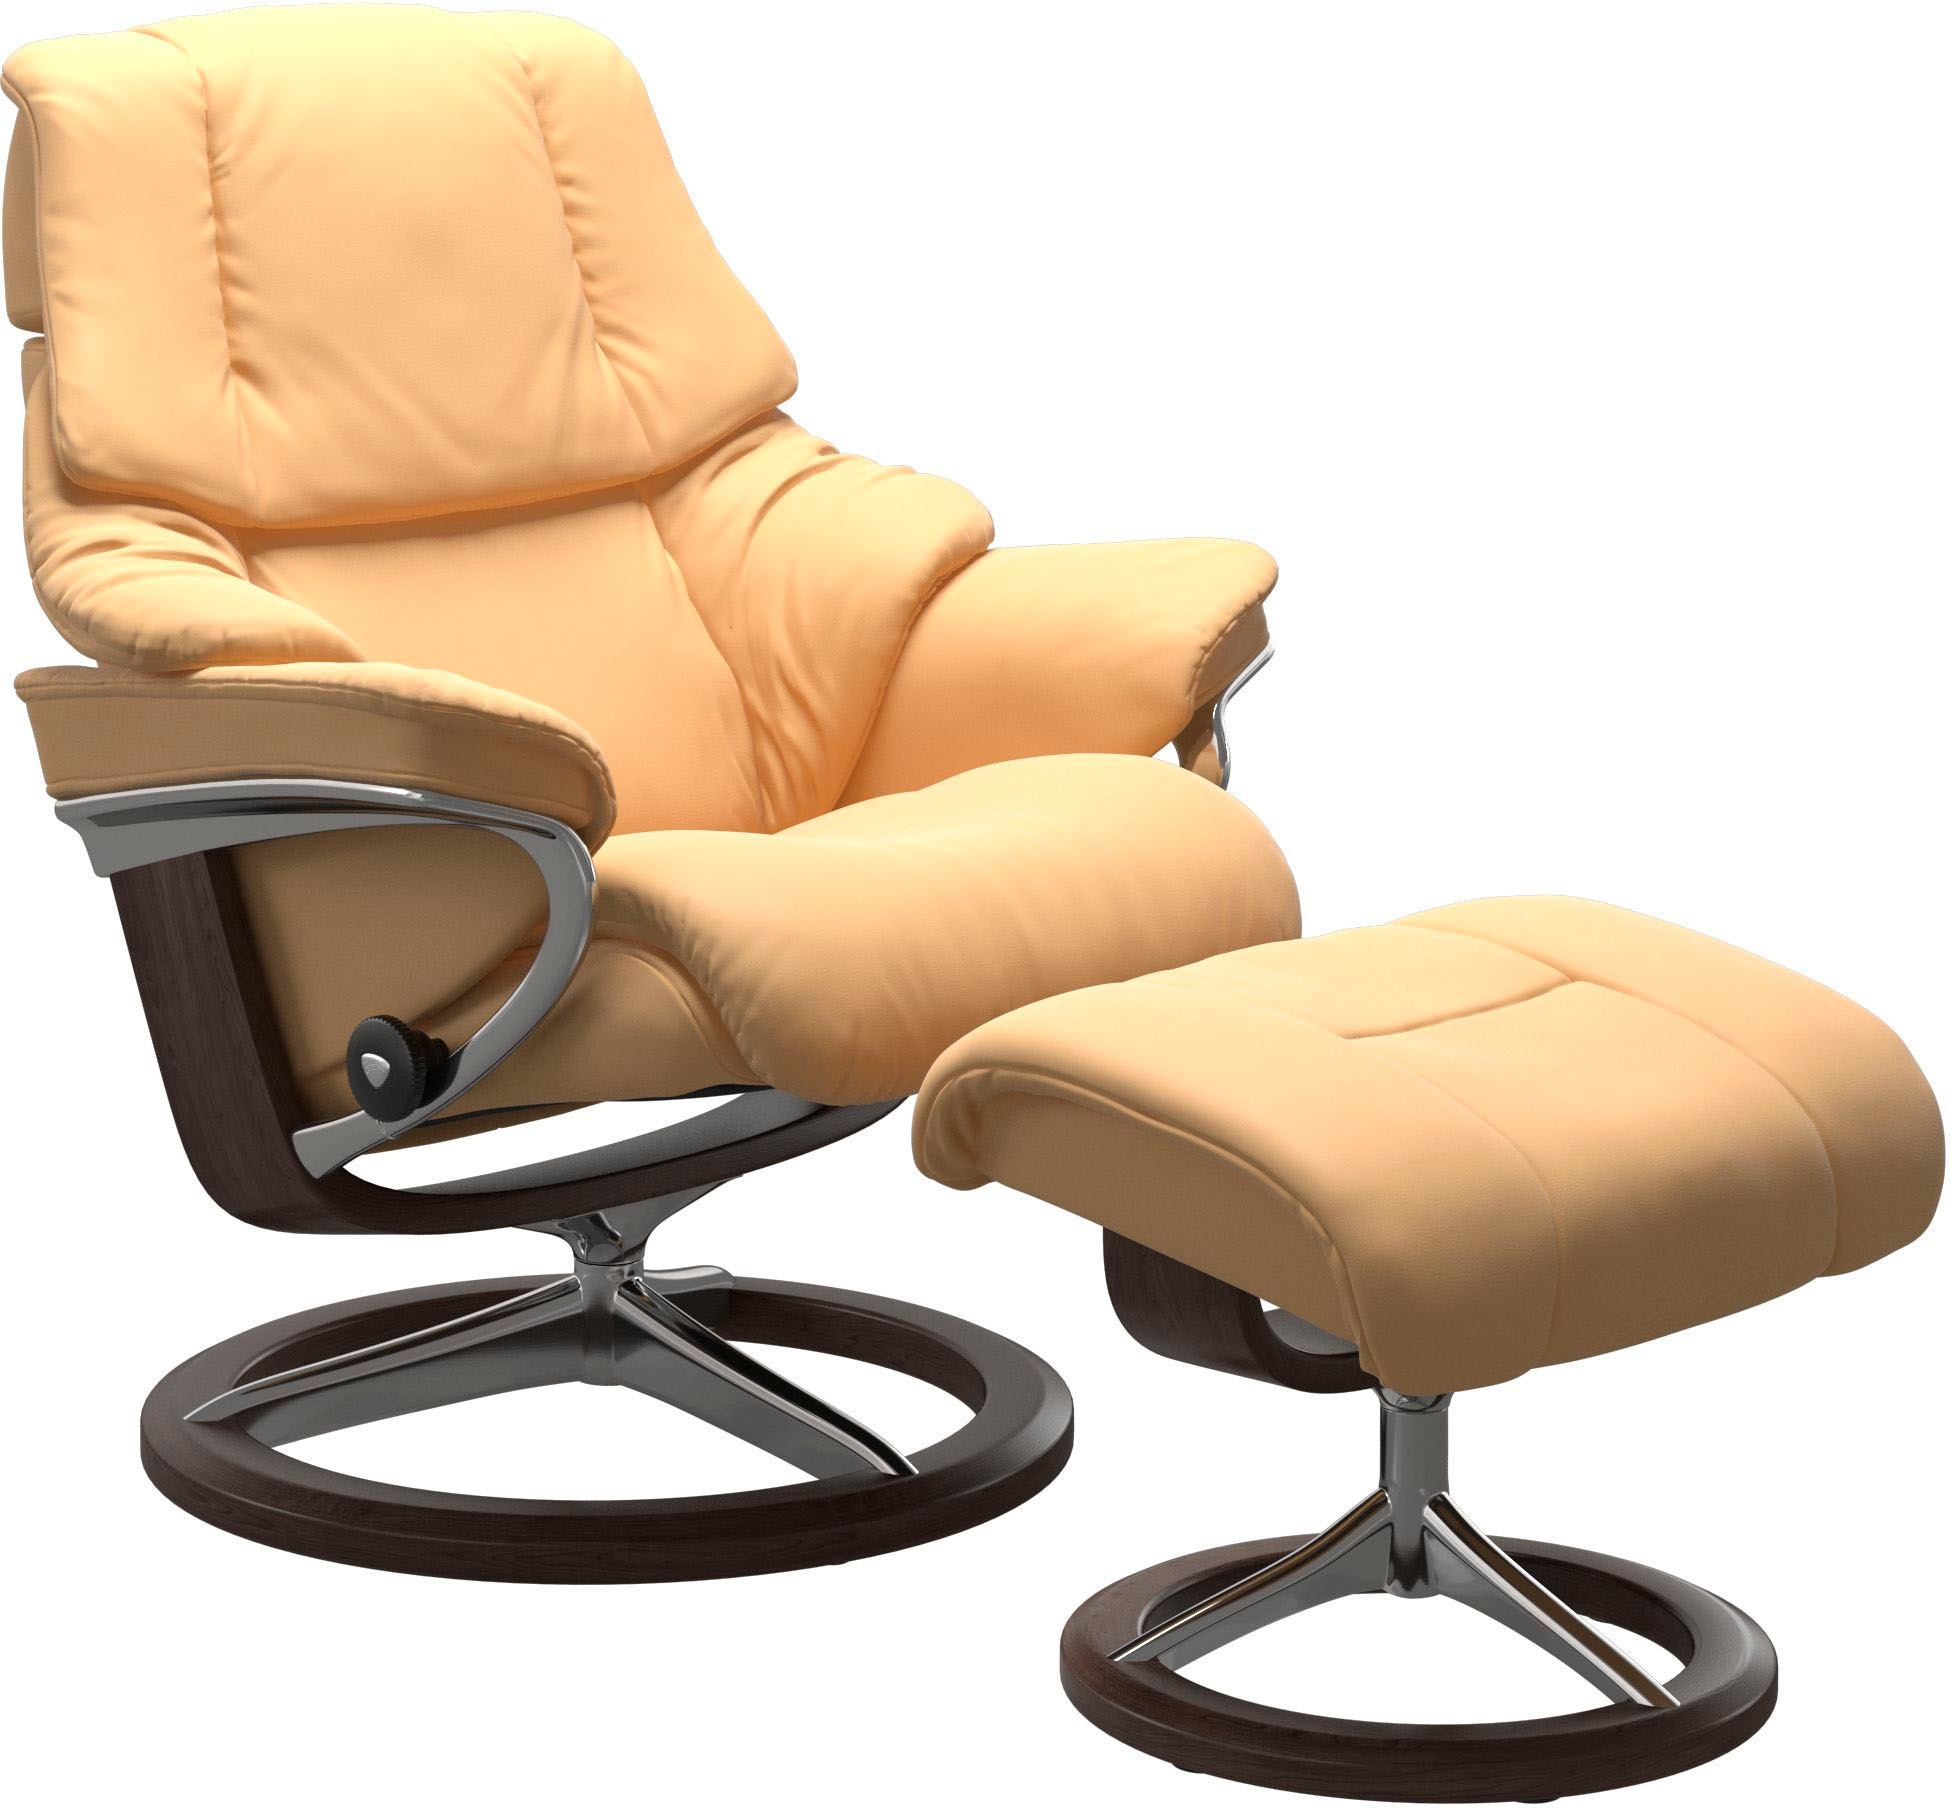 Relaxsessel STRESSLESS "Reno" Sessel Gr. Material Bezug, Material Gestell, Ausführung / Funktion, Maße, gelb (yellow) Lesesessel und Relaxsessel